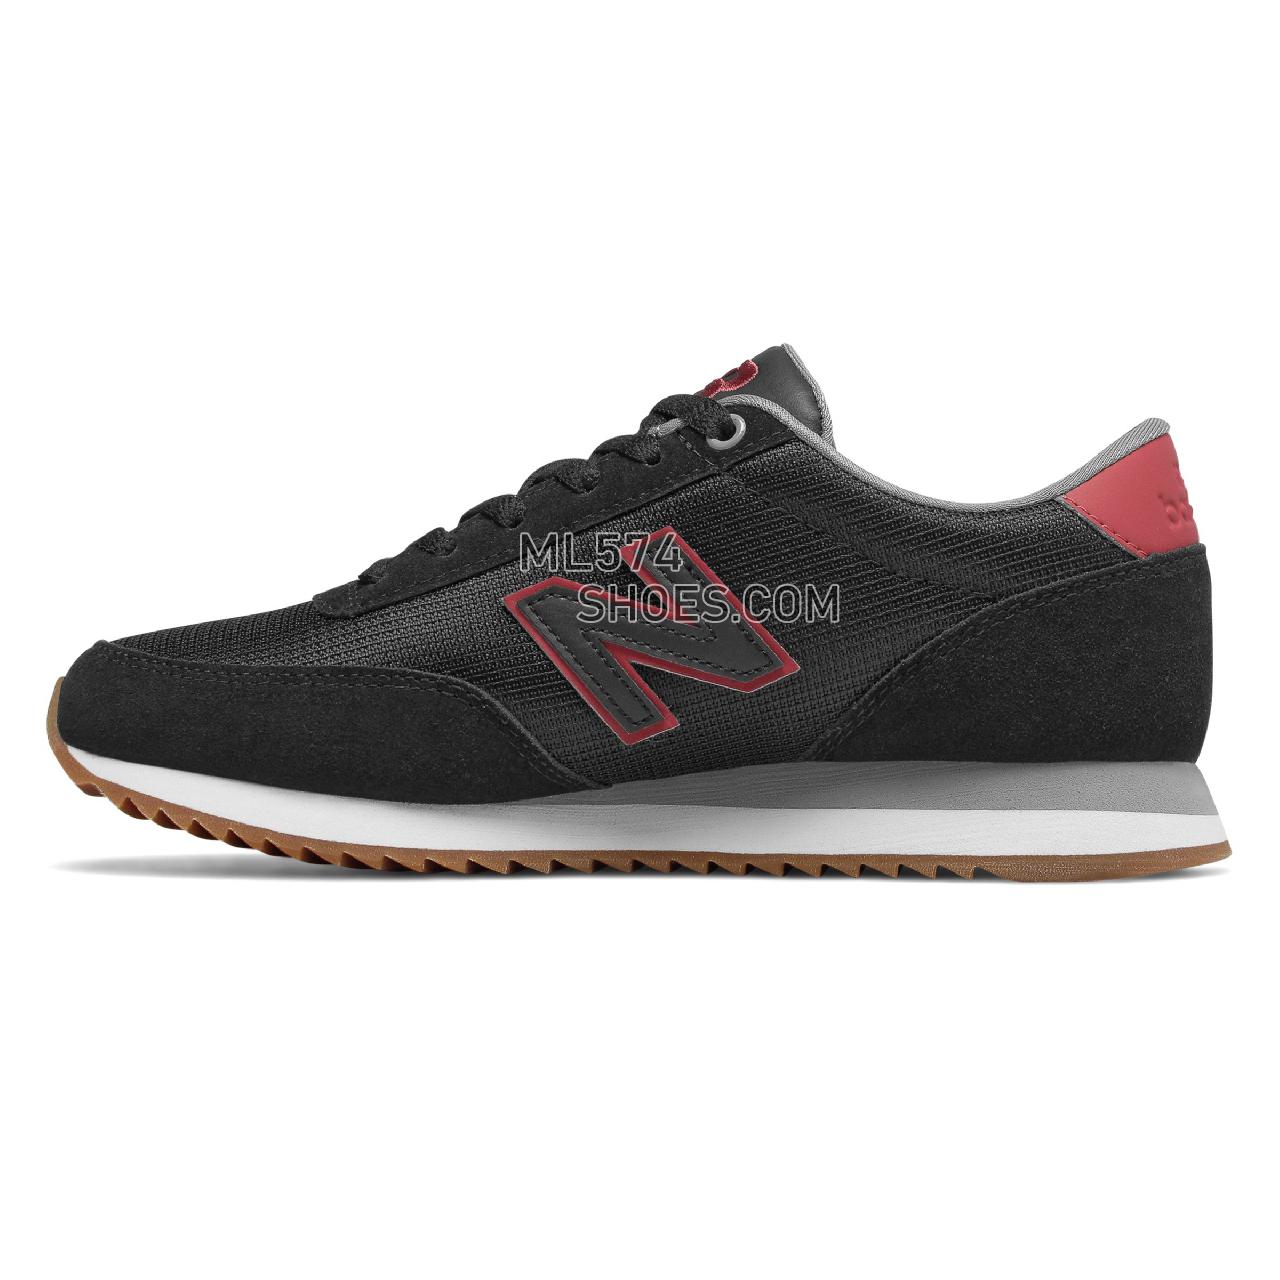 New Balance 501 - Women's 501 - Classic Black with Earth Red - WZ501MSA